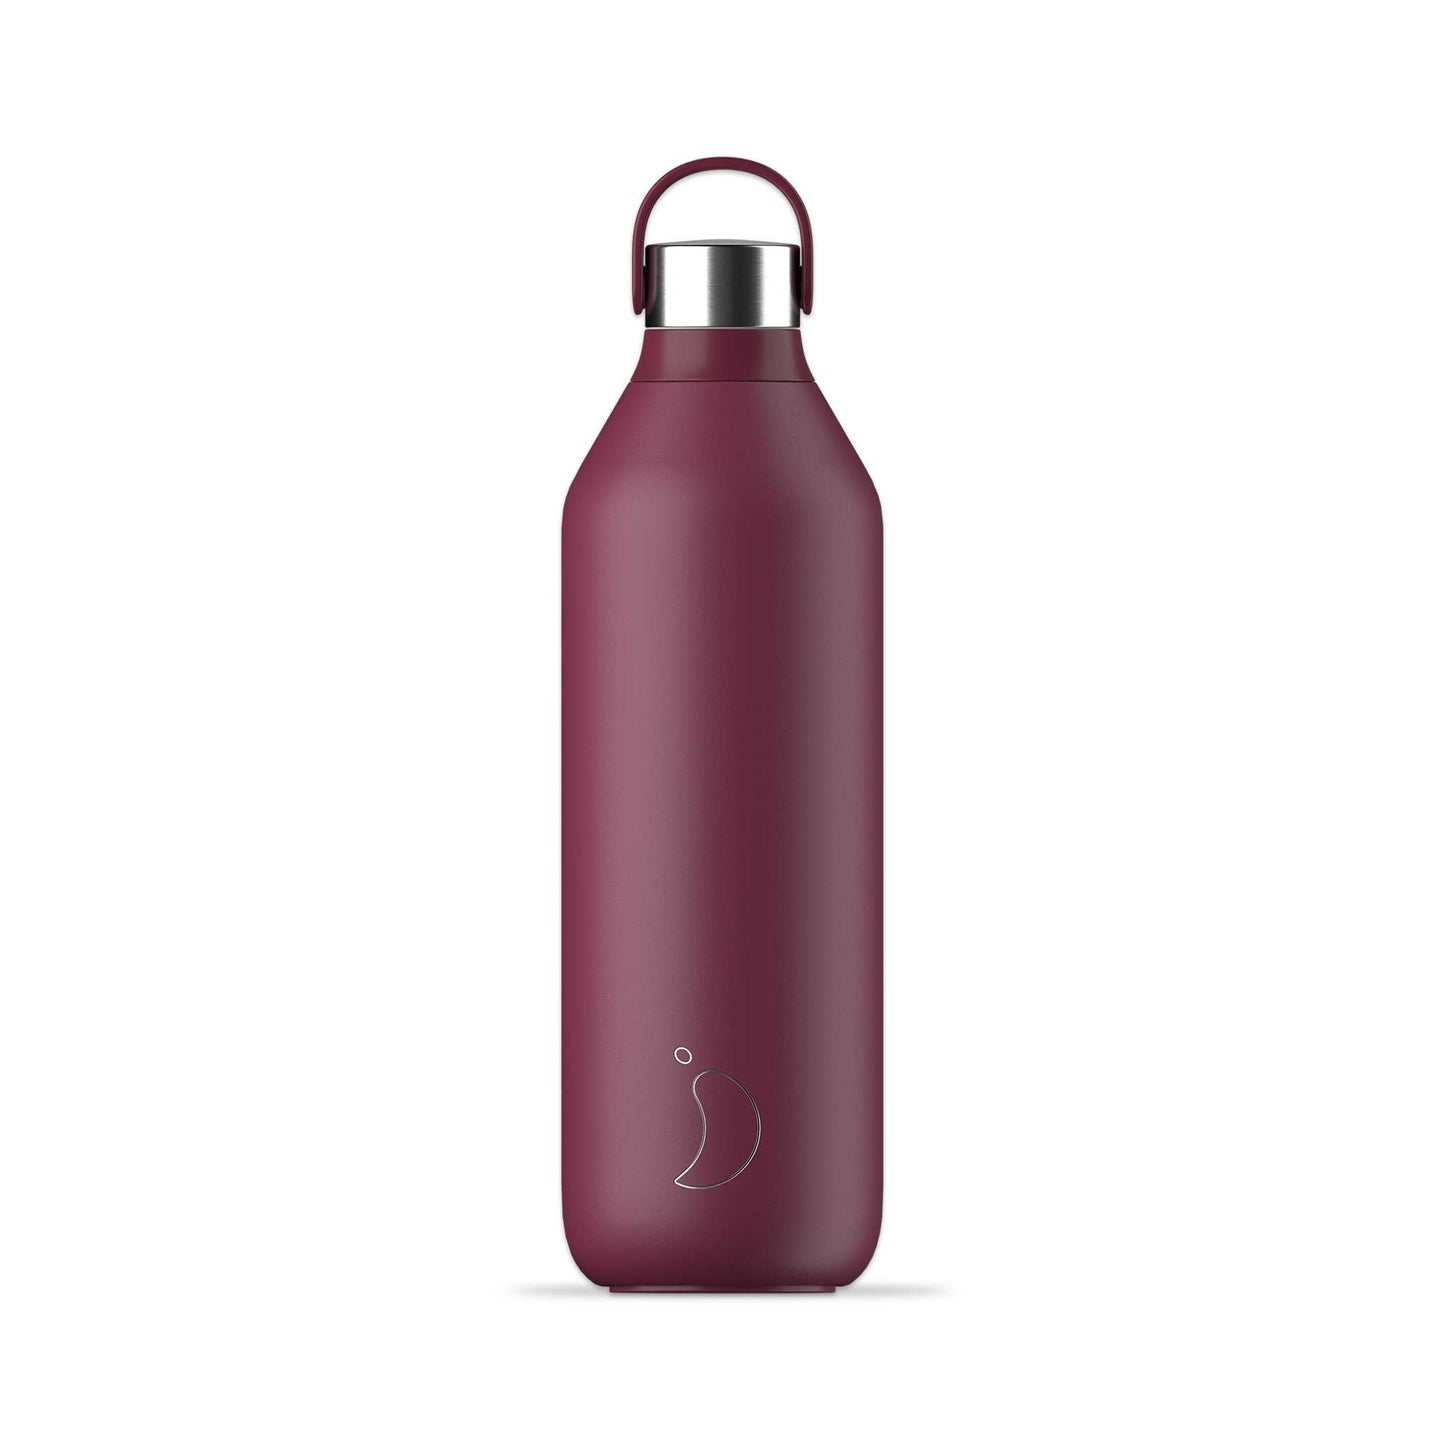 Chilly's Water Bottles Chilly's Series 2 Insulated Drinks Bottle - 1L - Plum Purple